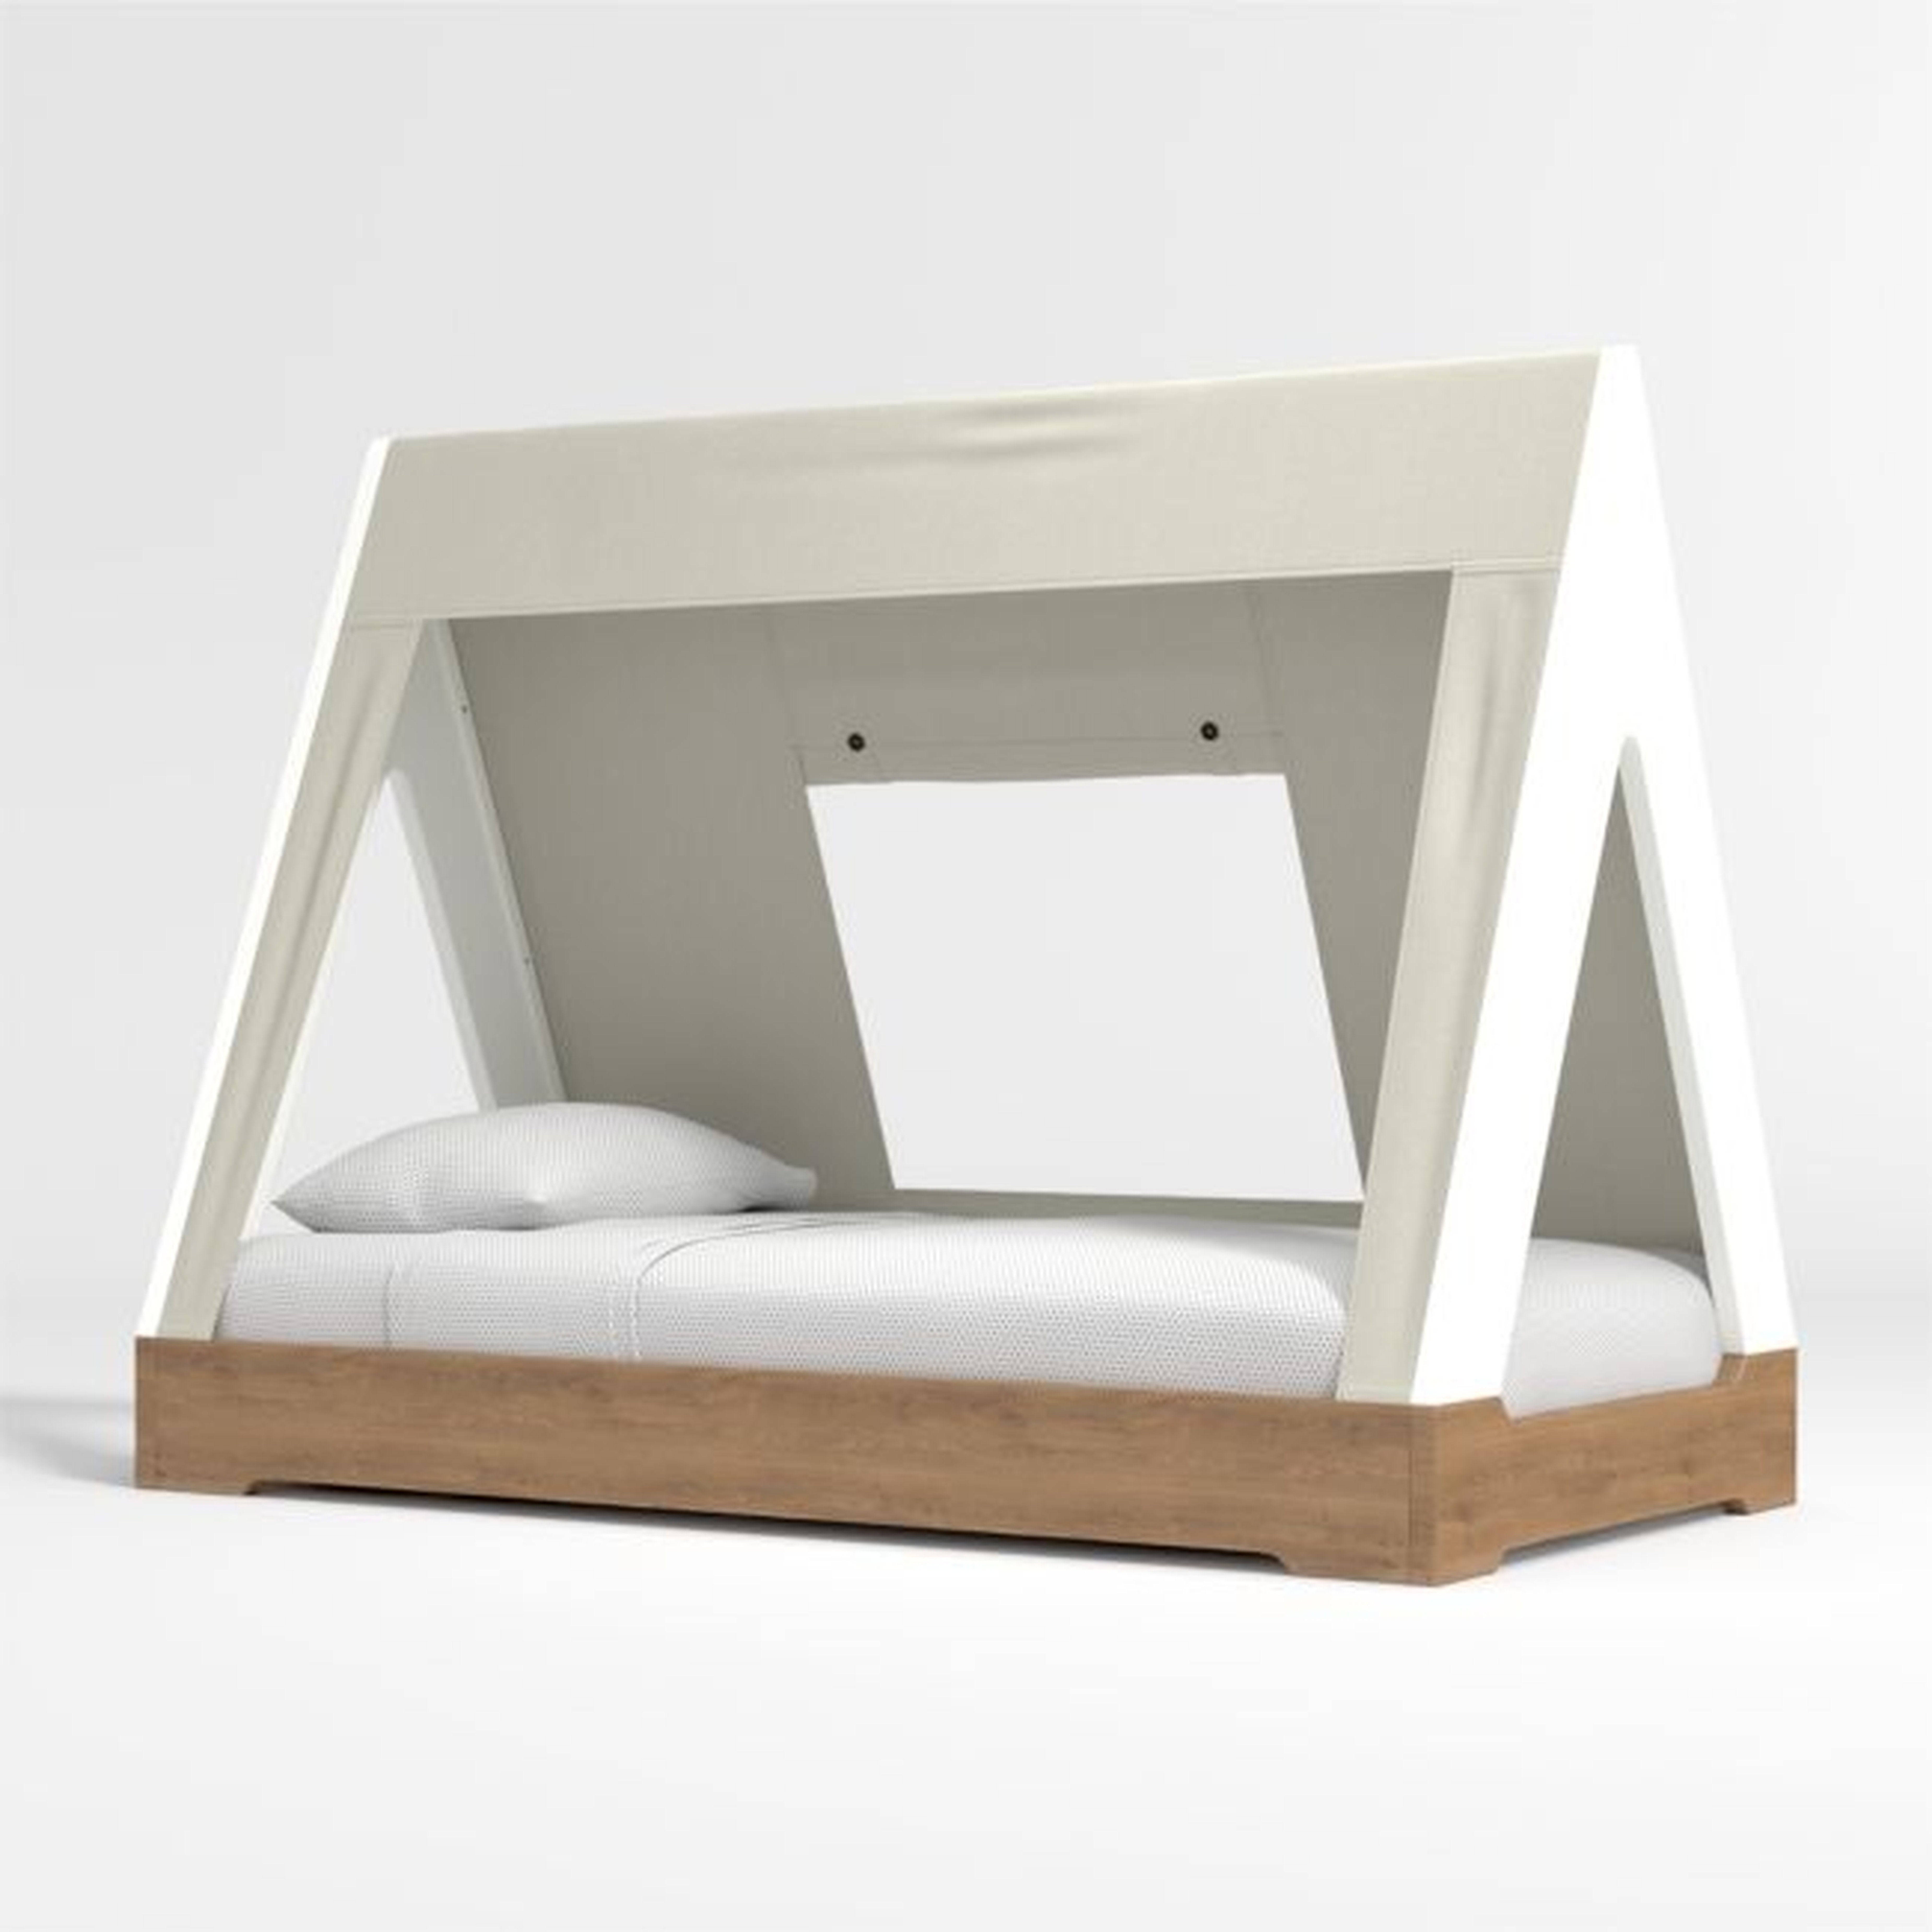 Teepee Bed Set - Crate and Barrel